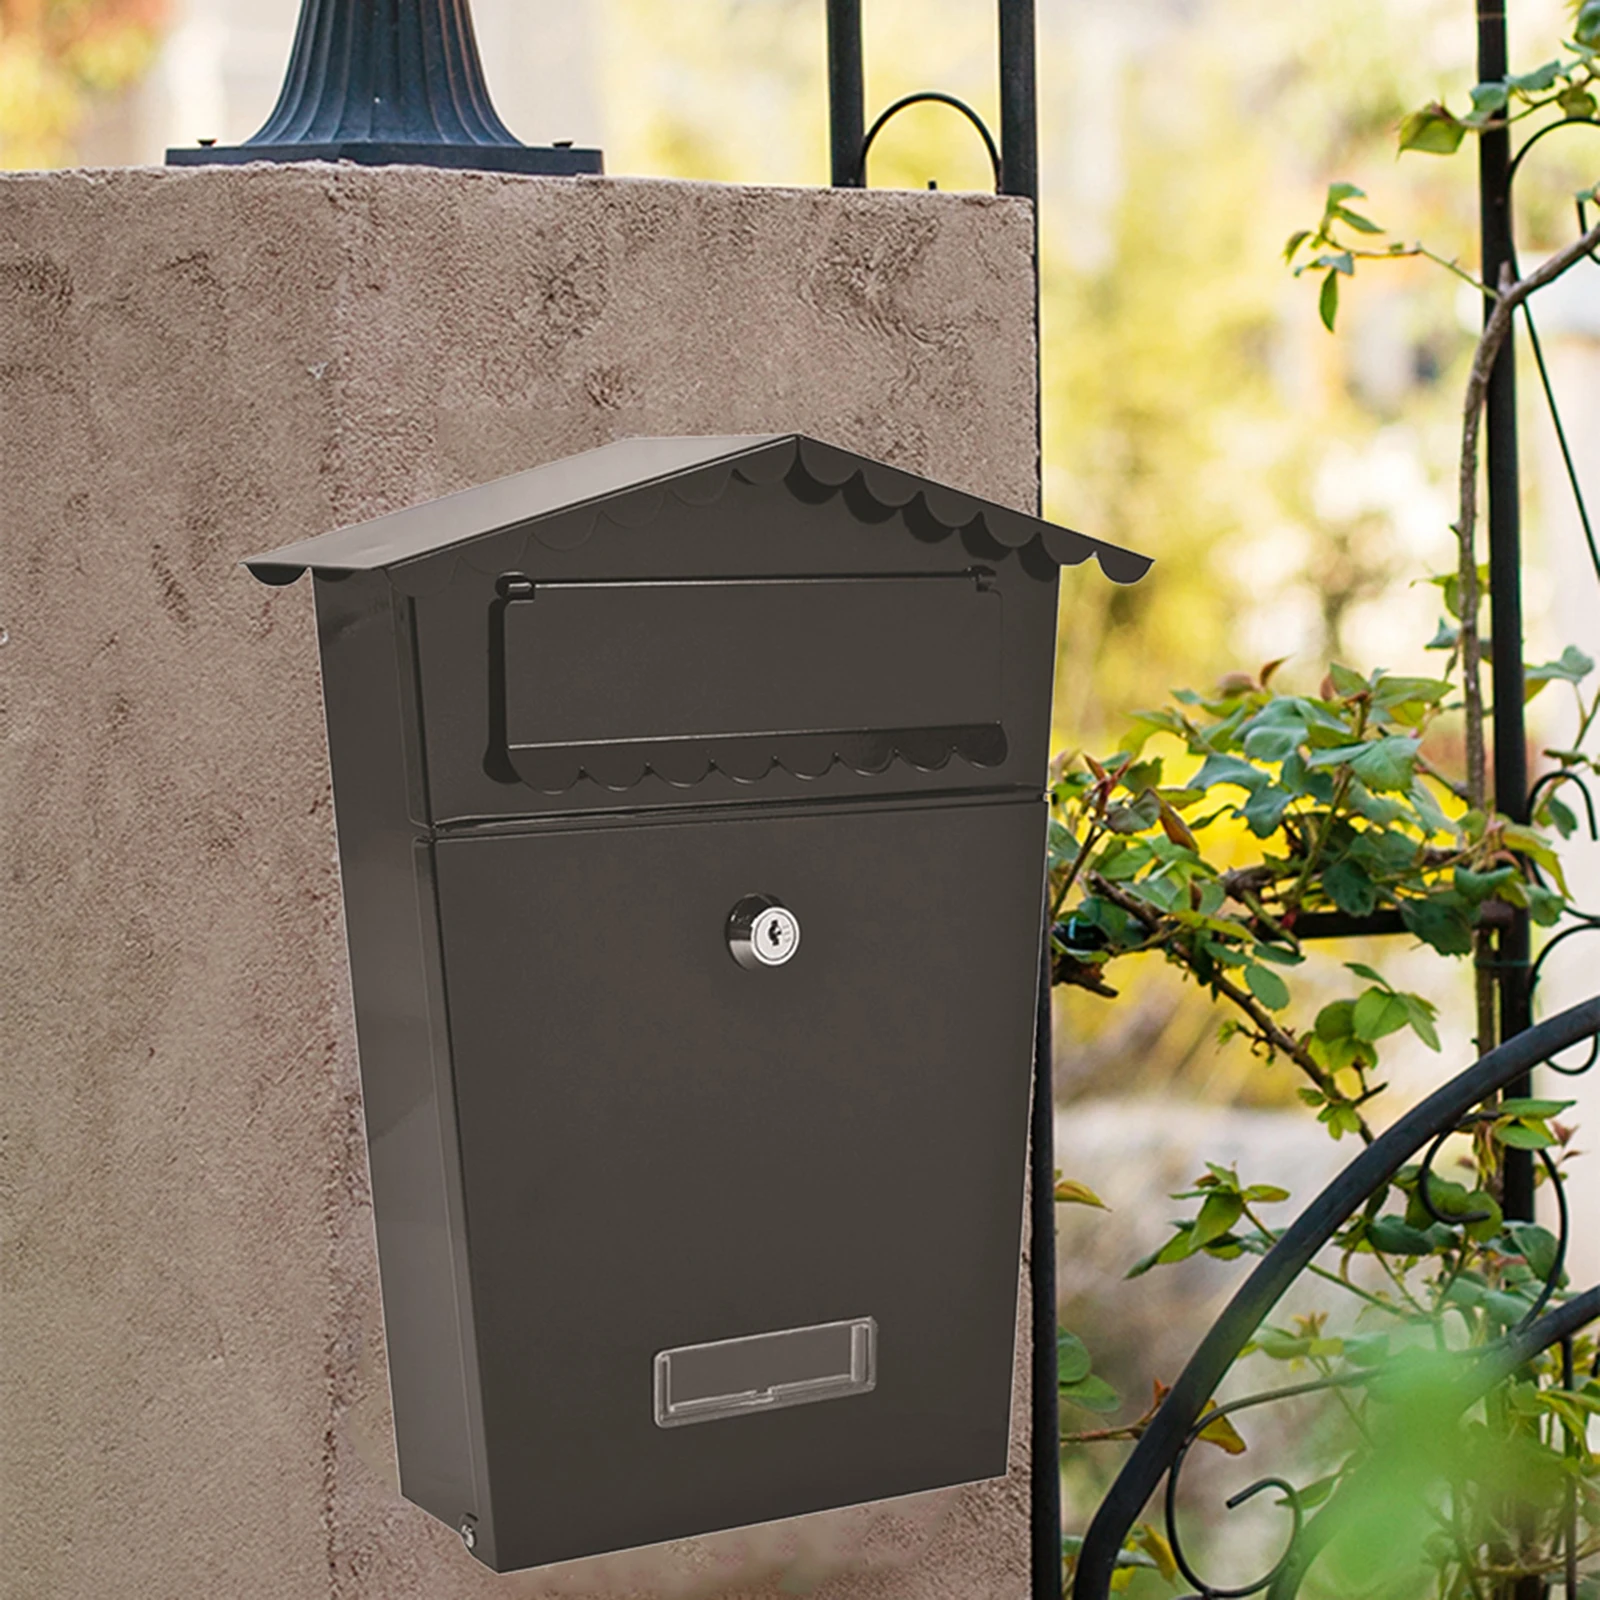 Metal Key Lock Mail Boxes Outdoor Locking Wall Mount Mailbox Security Key Drop Box Collection Boxes 25x8x30cm